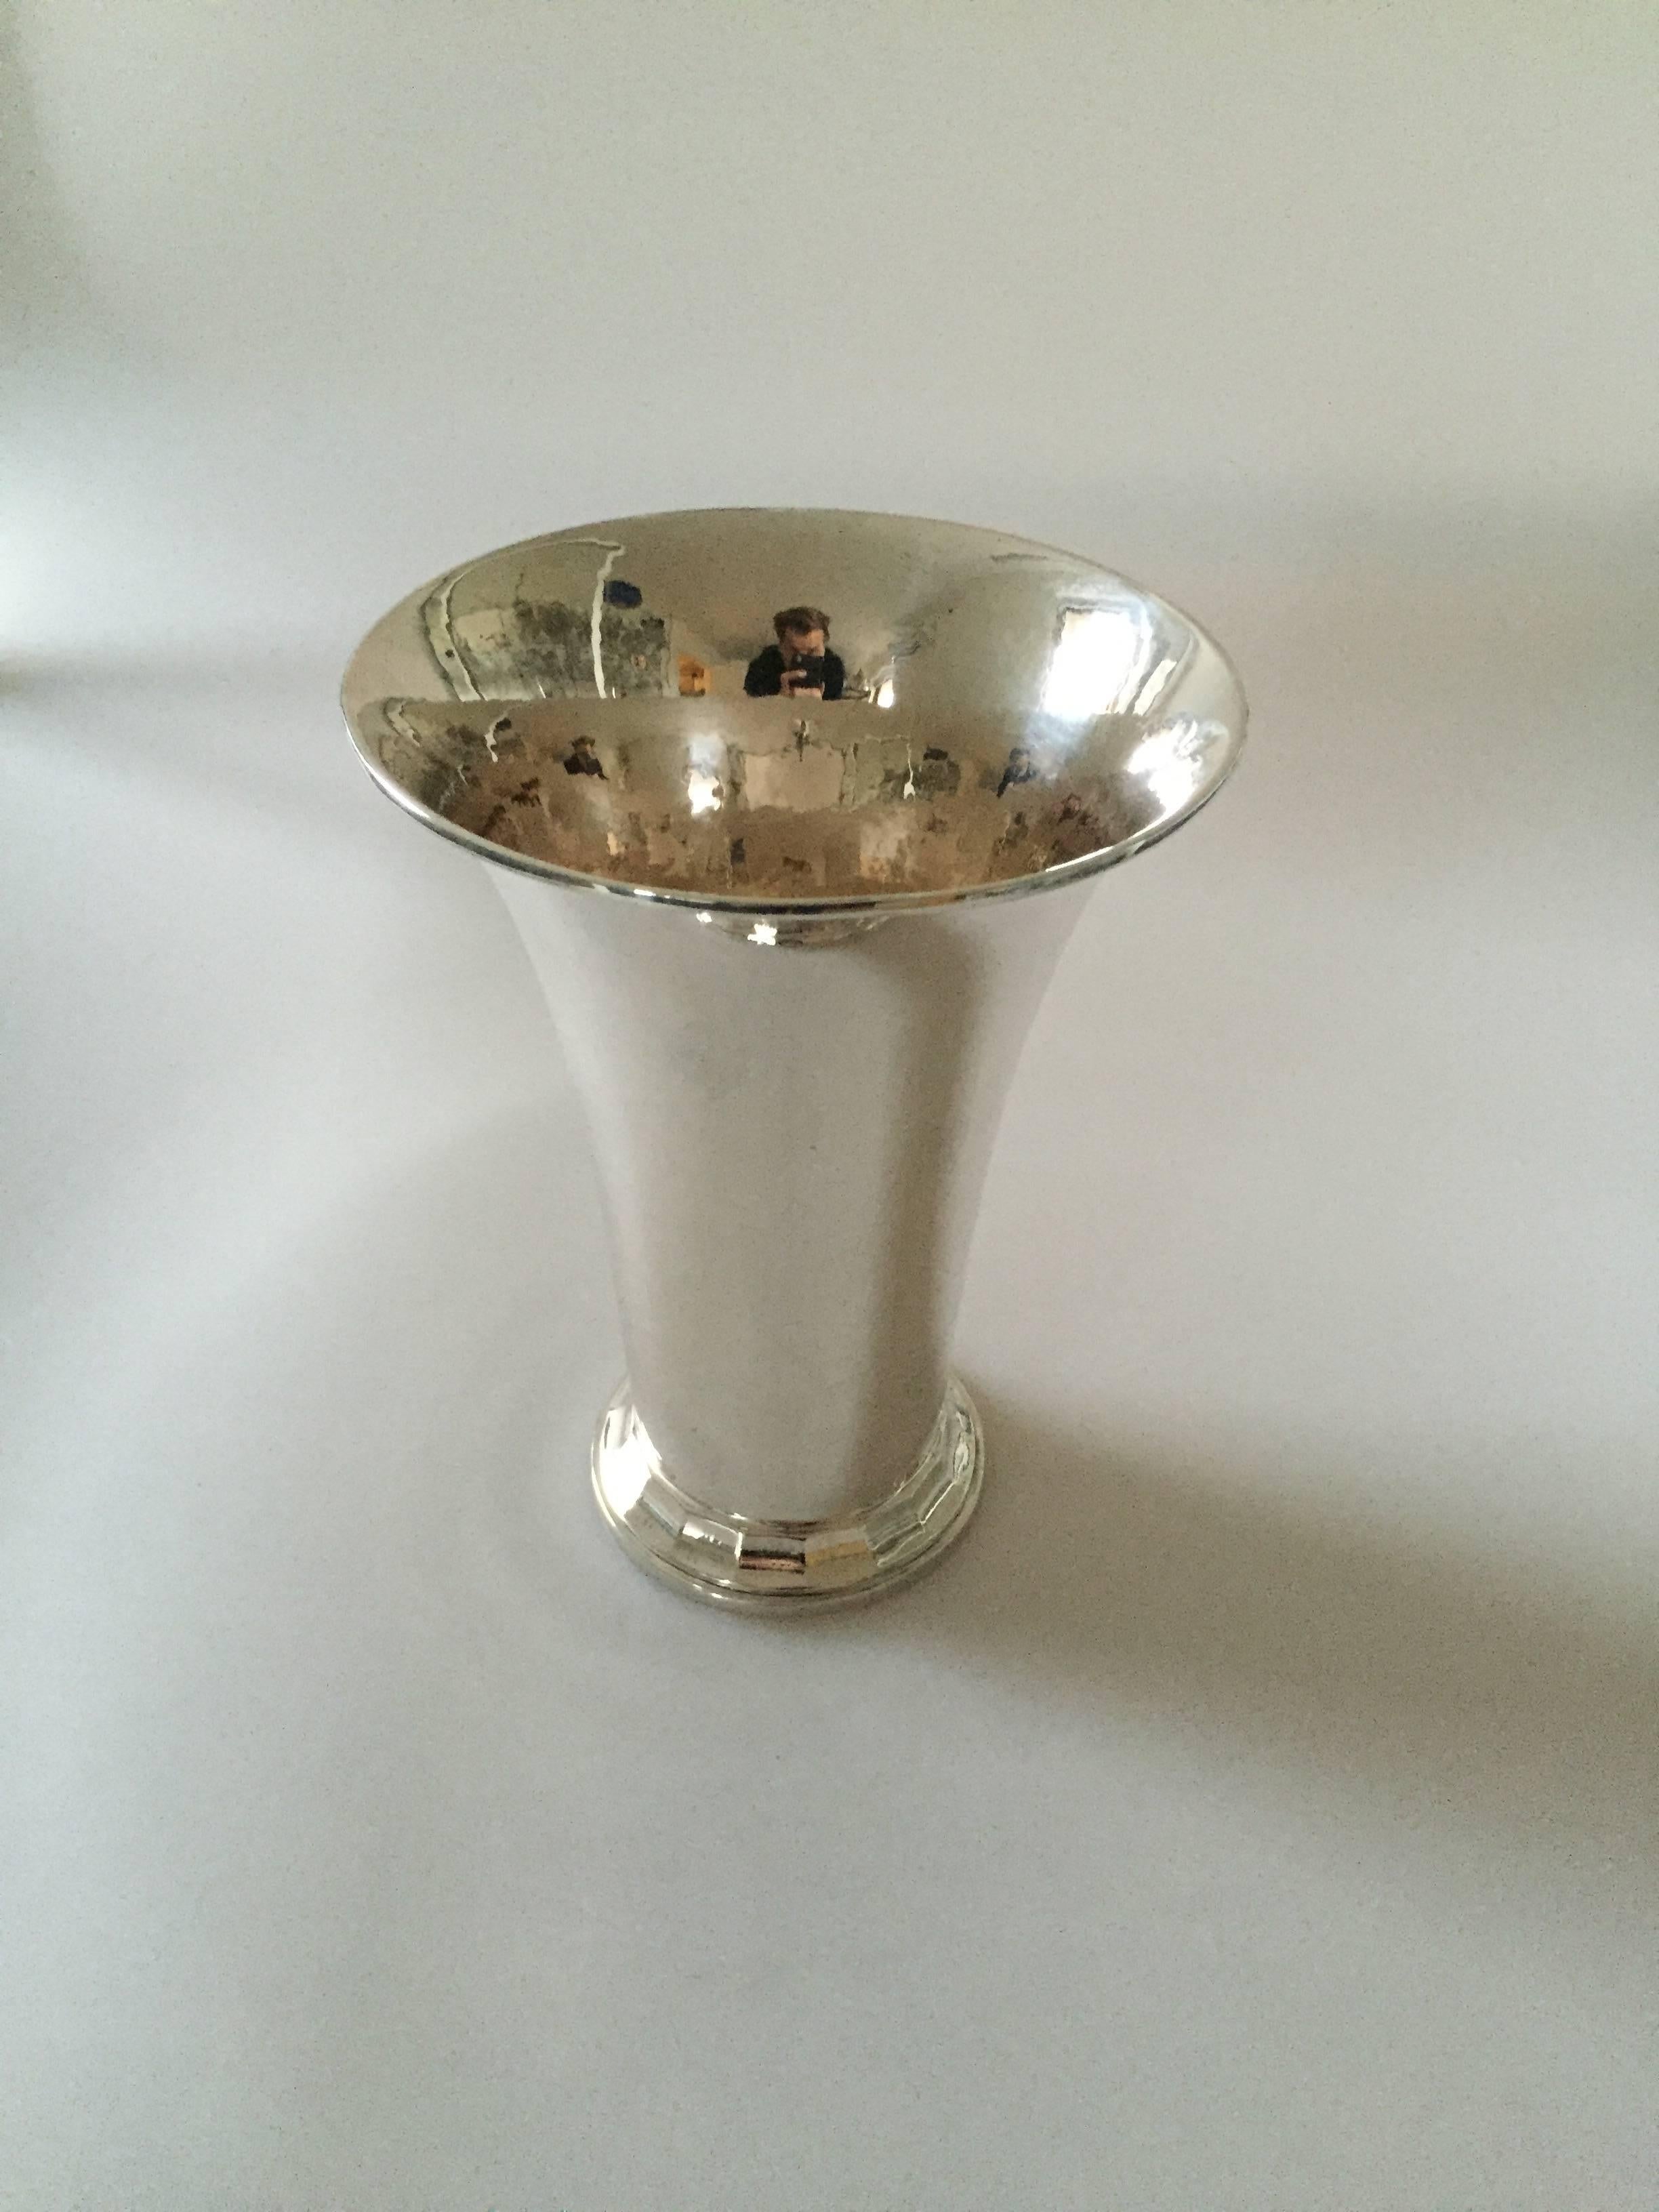 Georg Jensen hammered silver vase from 1929. 

Measures: 18.8 cm H and 14.5 cm in diameter.